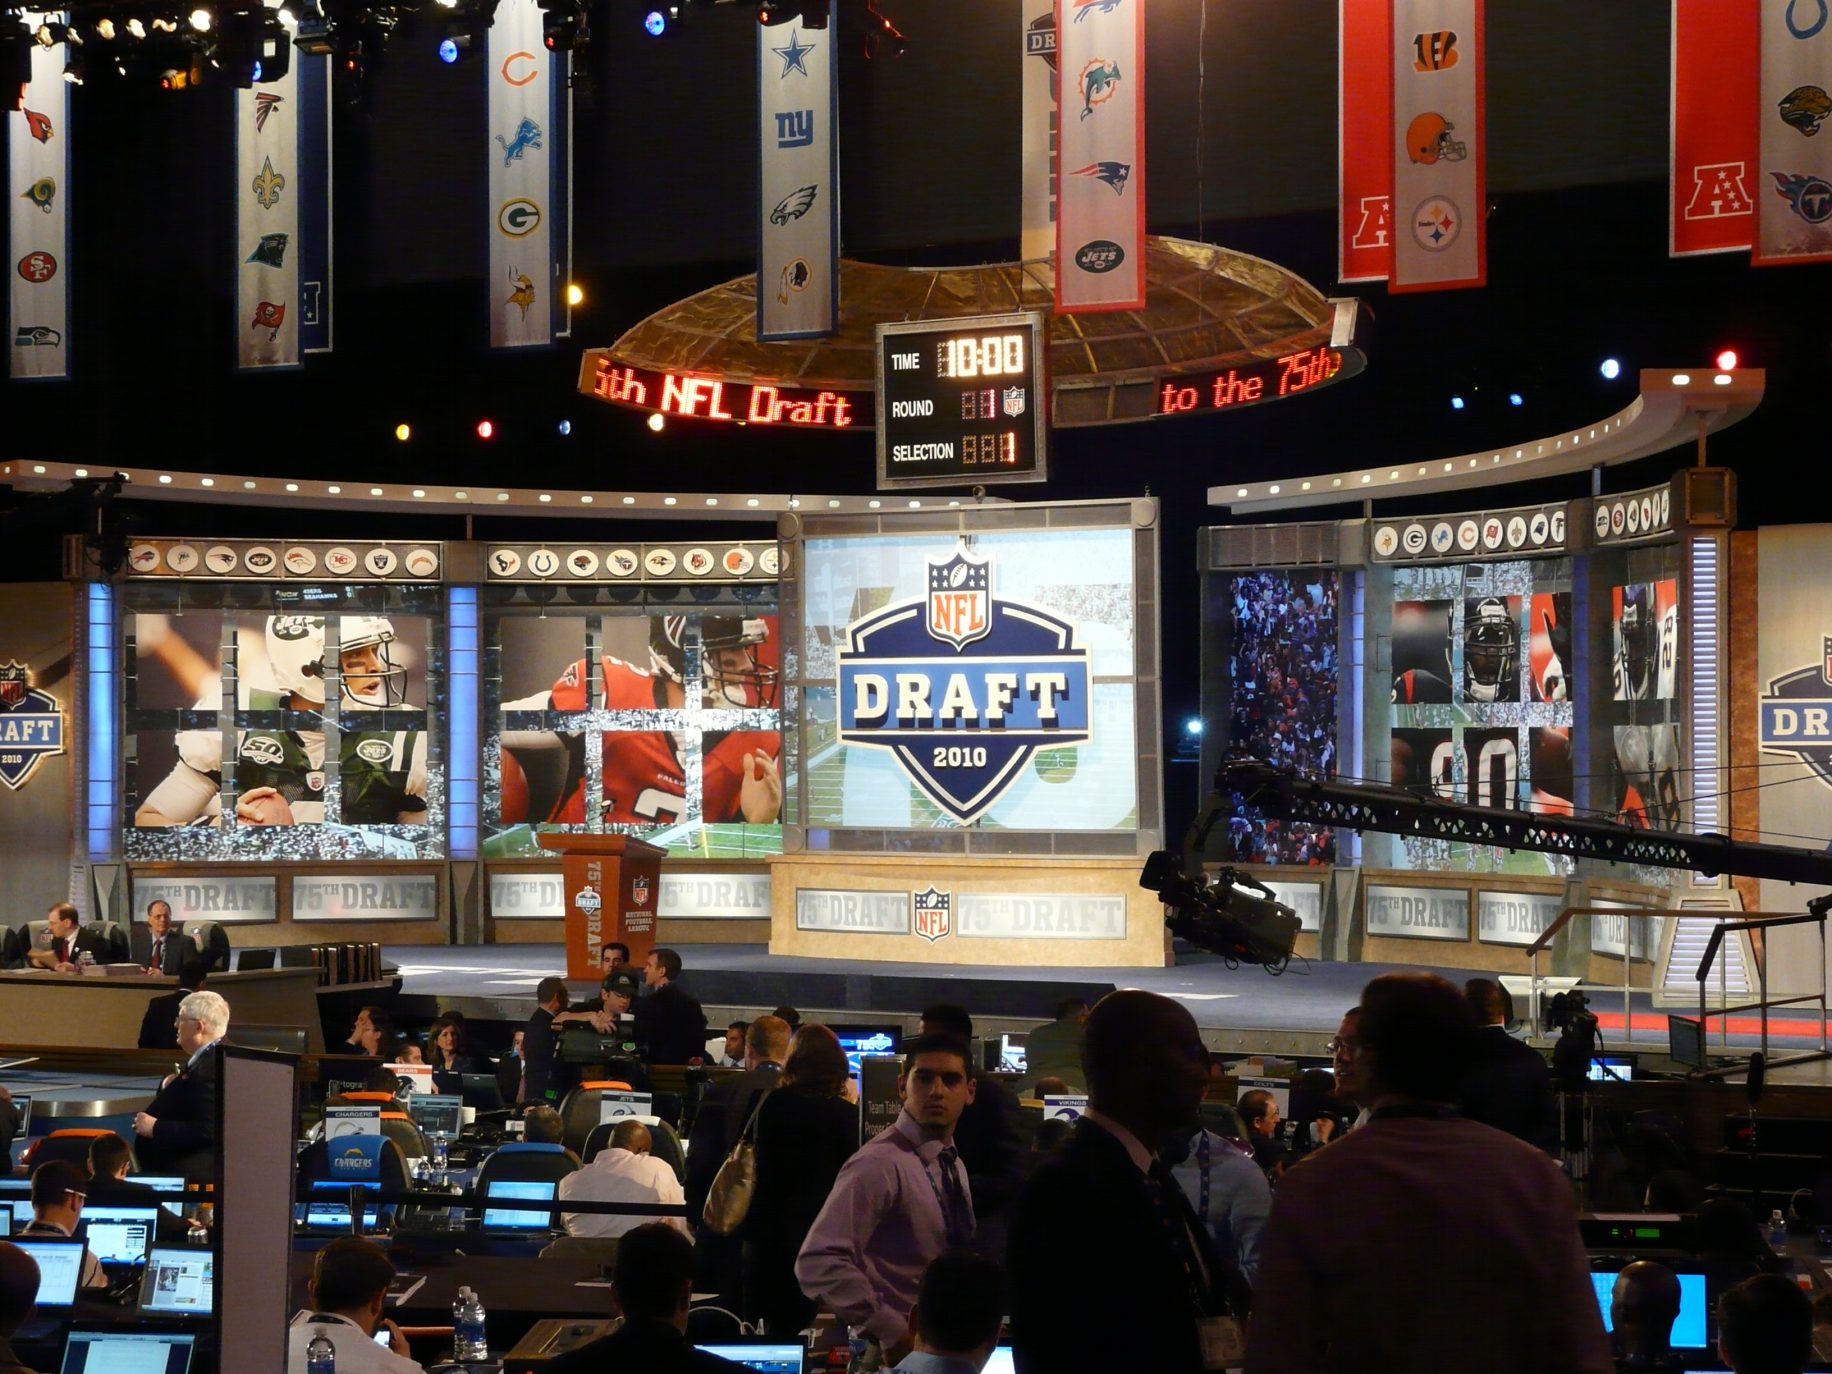 NFL Draft. Photo Credit: Marianne O'Leary | Under Creative Commons License